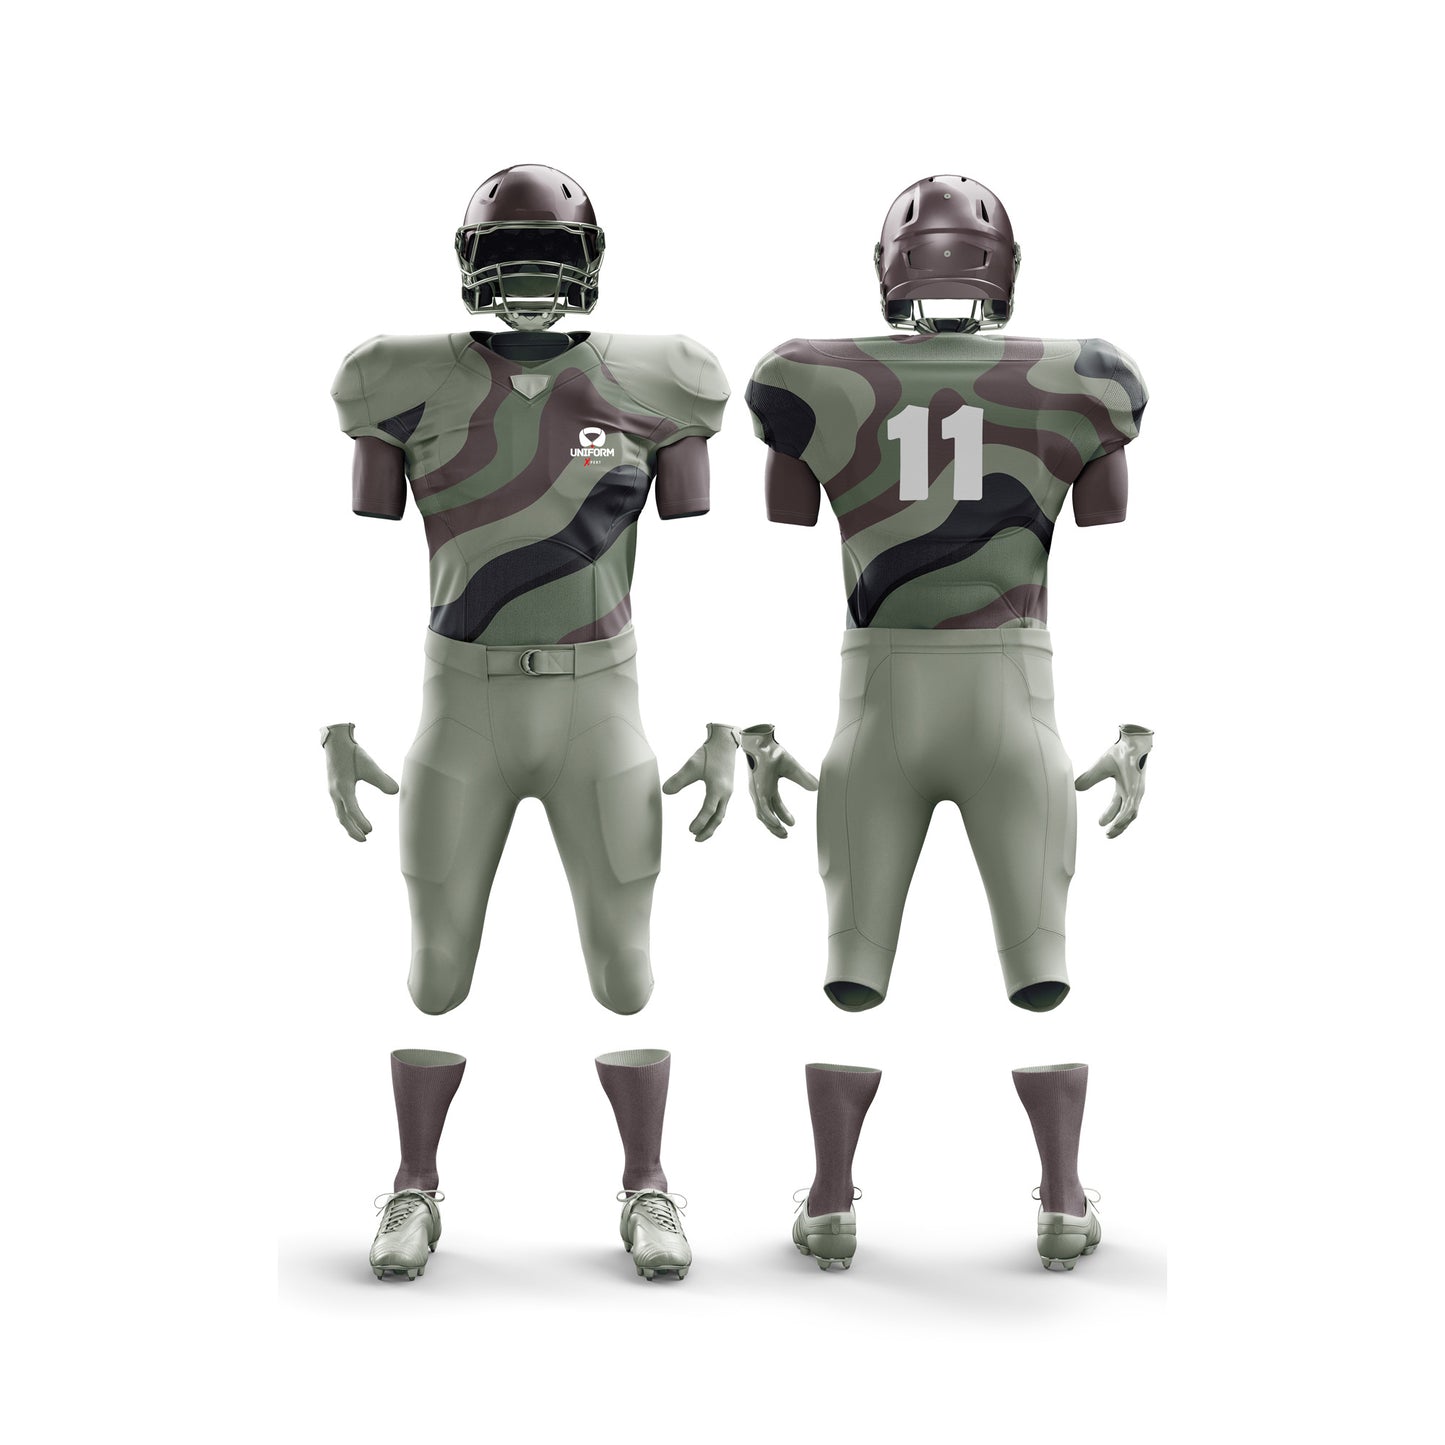 Explore the Uniform Xpert American Football Uniform, crafted for elite athletes seeking top-tier performance. This premium gear combines advanced moisture-wicking technology, reinforced seams, and a sleek, professional design. Ideal for football players in the USA, UK, Canada, featuring superior comfort and durability. Elevate your game with this essential football attire designed to excel on the field.